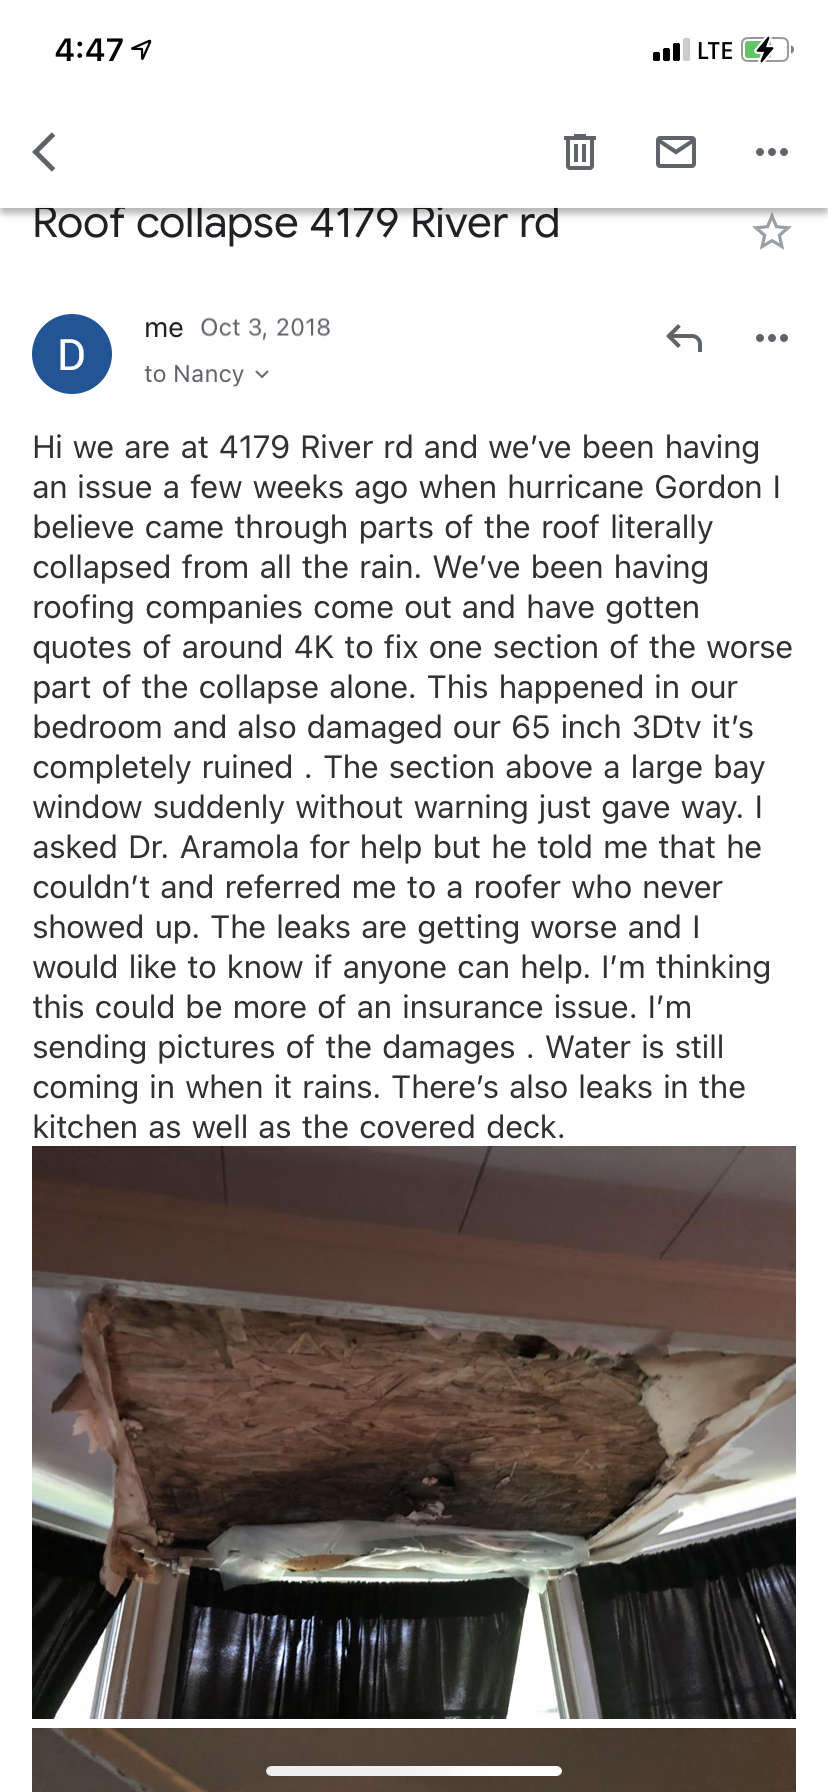 The email of roof collapsing 